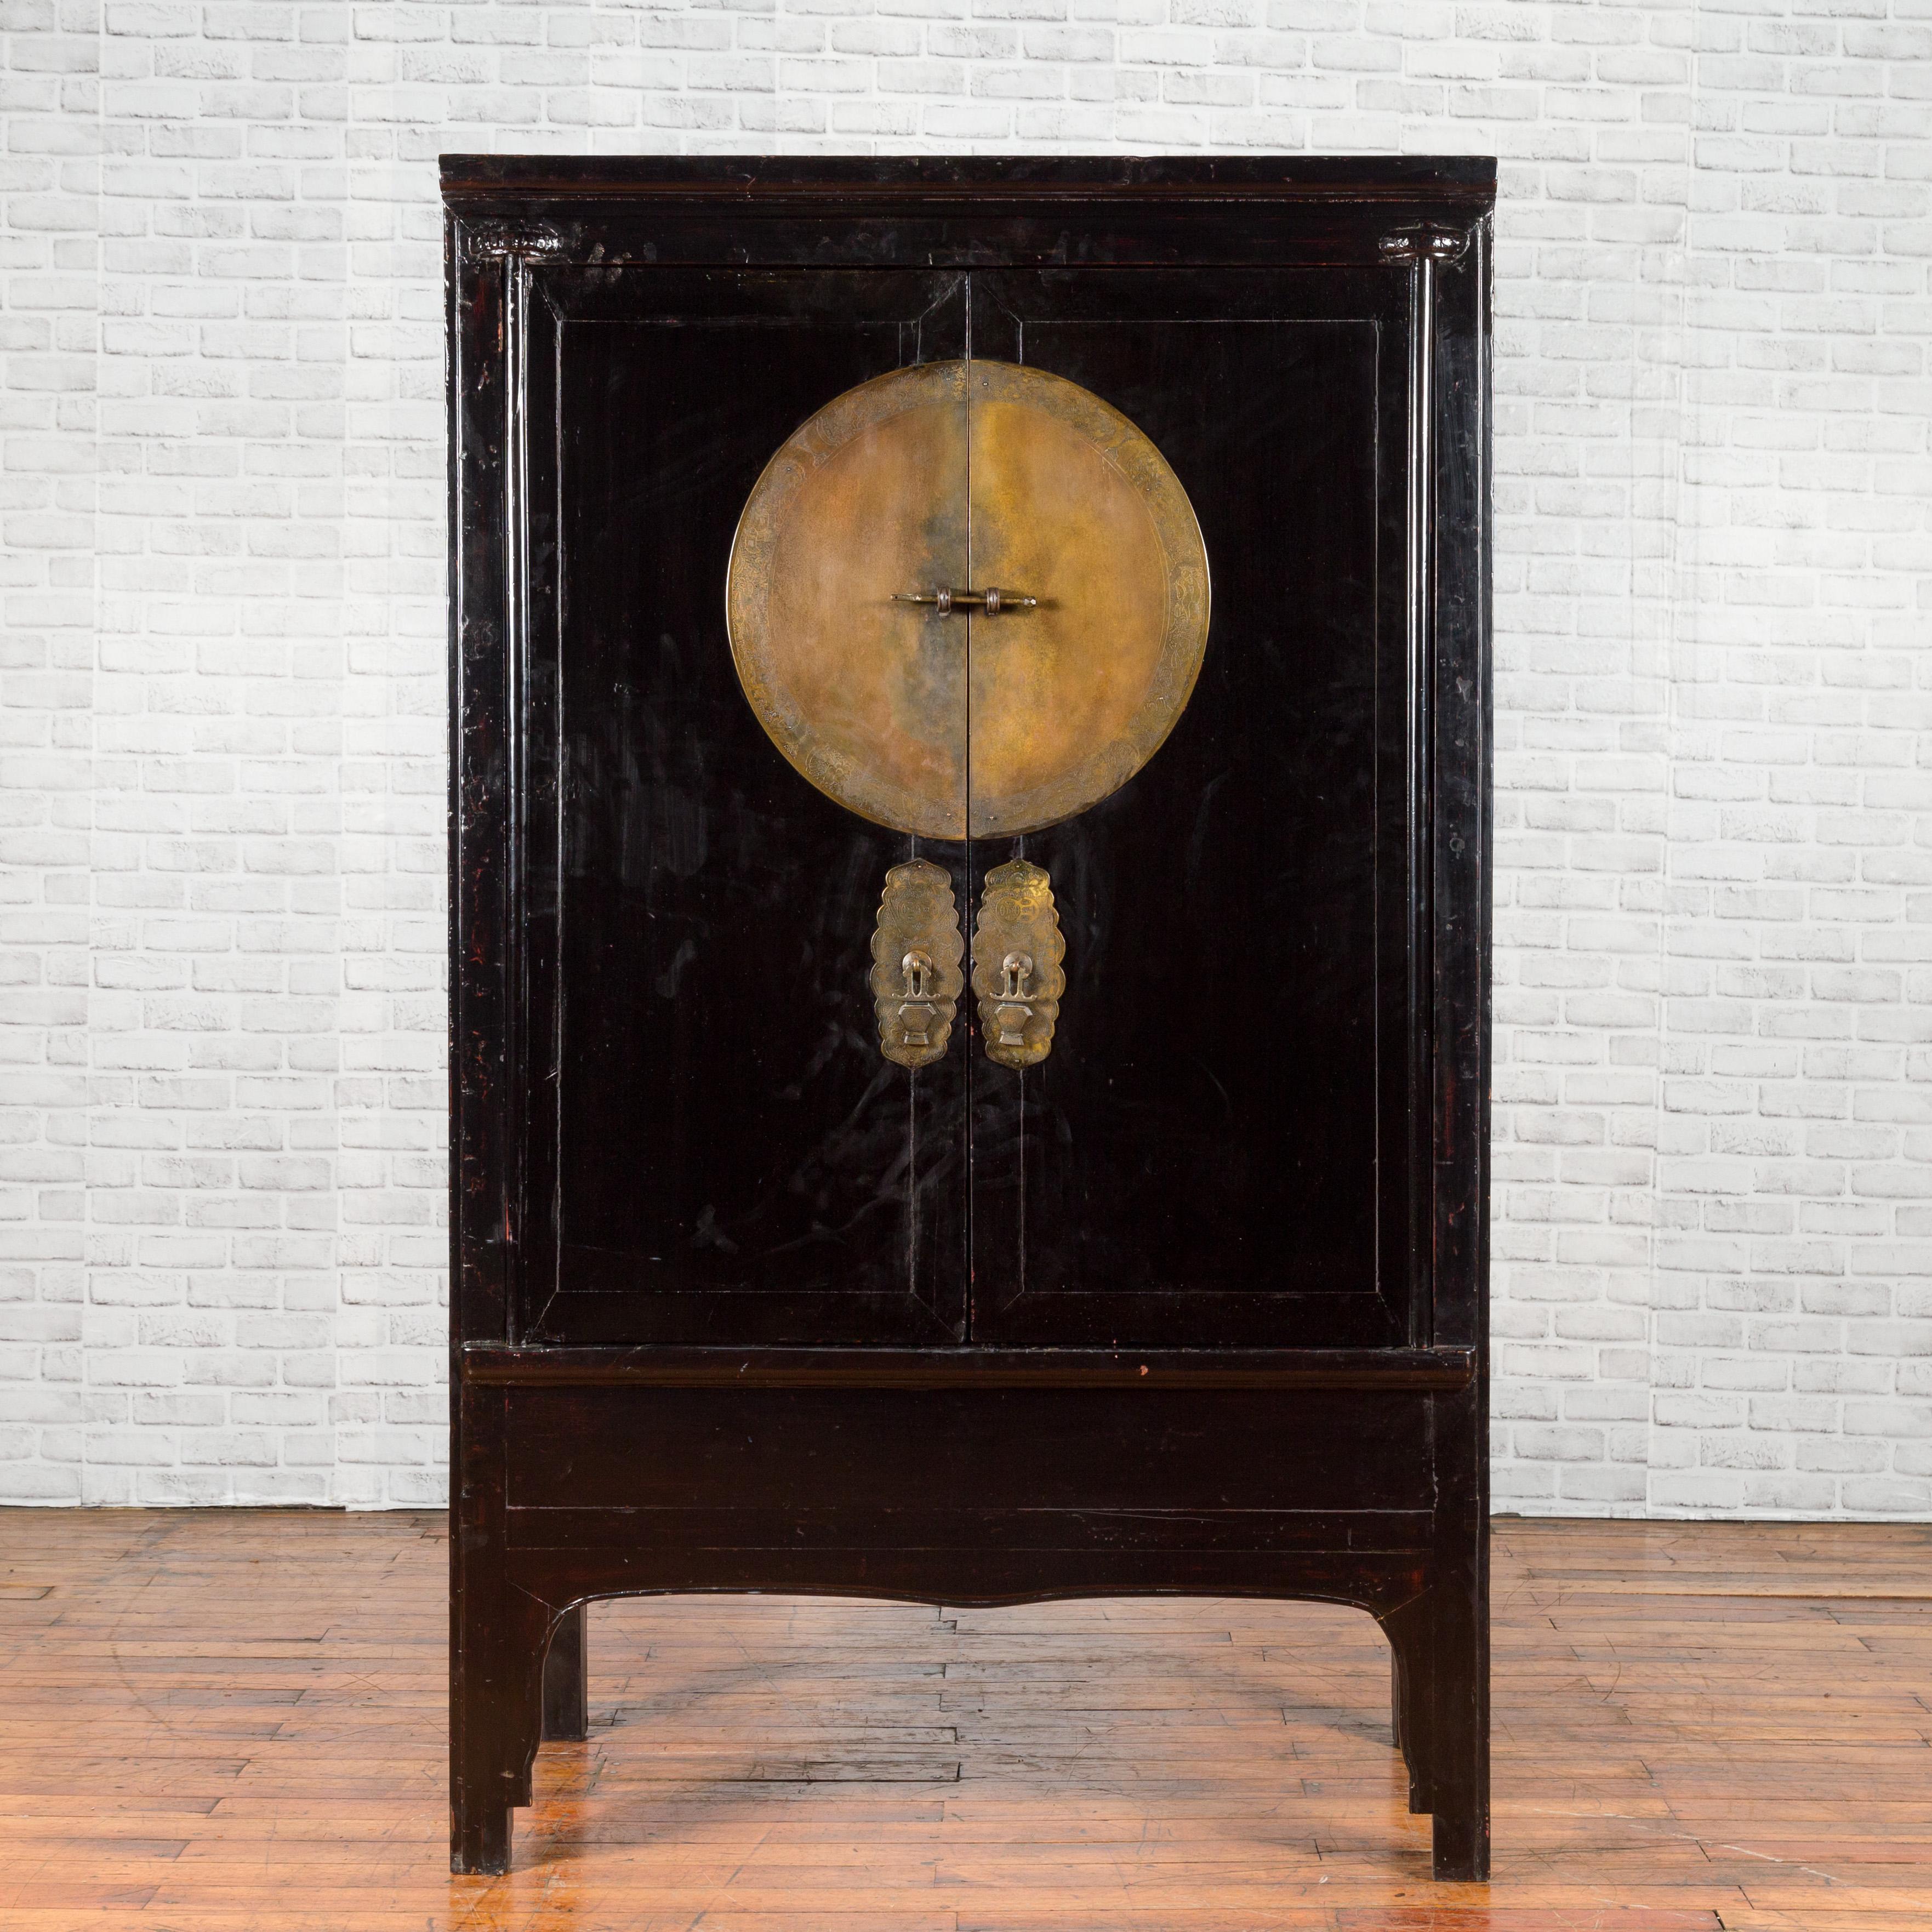 A Chinese Qing Dynasty black lacquer cabinet from the 19th century, with large medallion hardware, inner drawers and removable panel. Created in China during the Qing Dynasty, this black lacquer cabinet features two doors, fitted with a very large